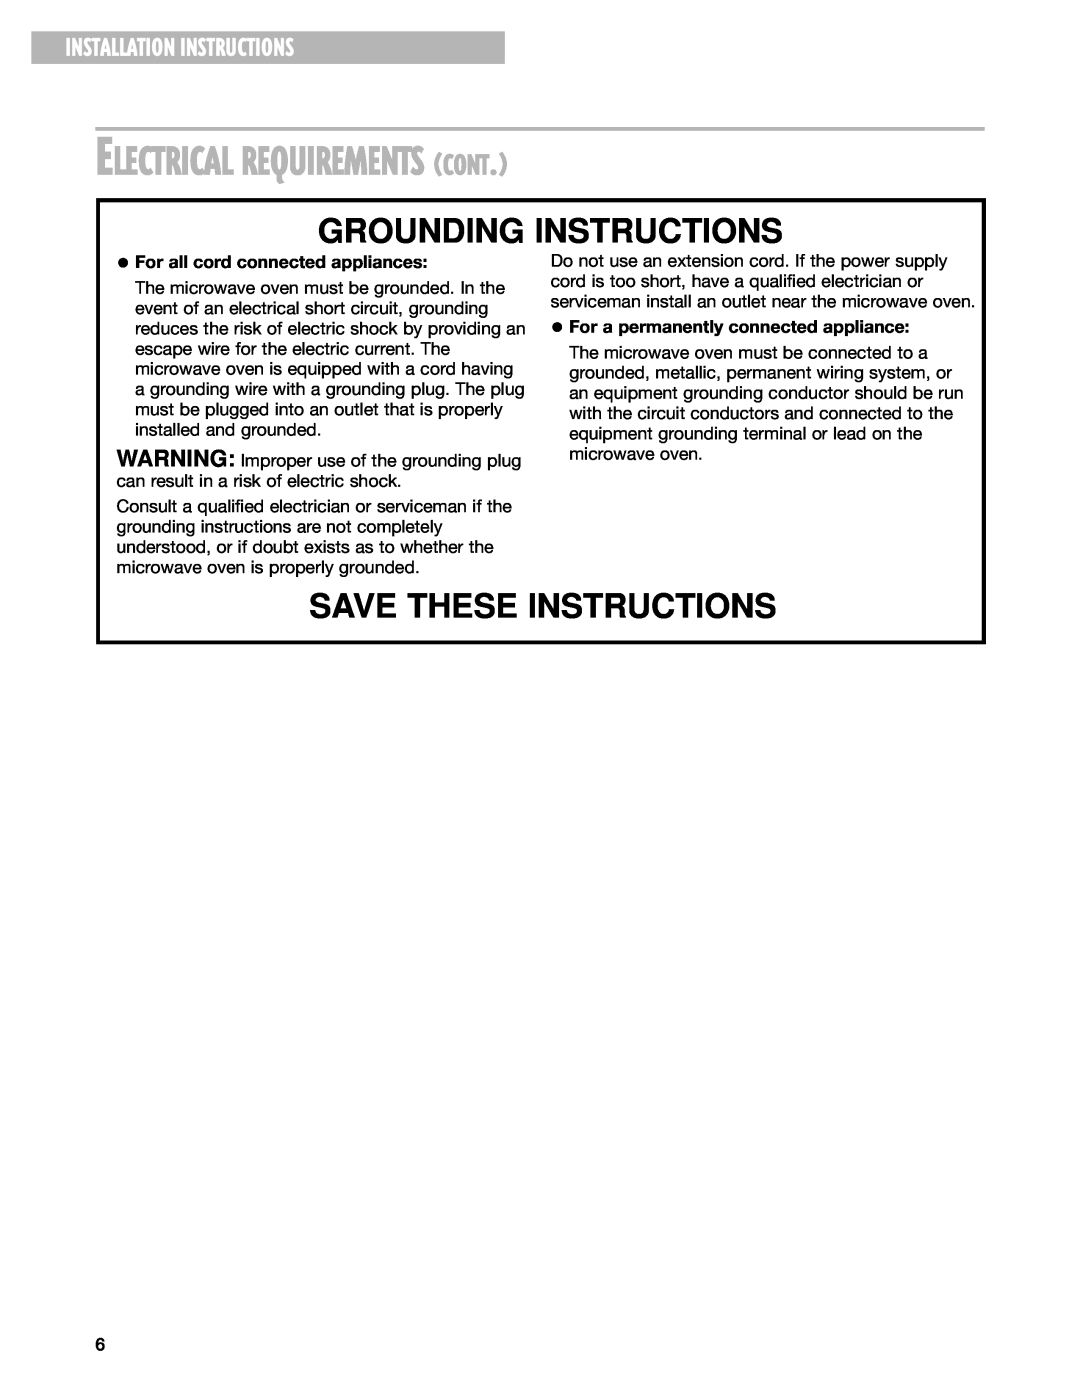 Whirlpool GT1196SH, GT1195SH Electrical Requirements Cont, Grounding Instructions, Installation Instructions 